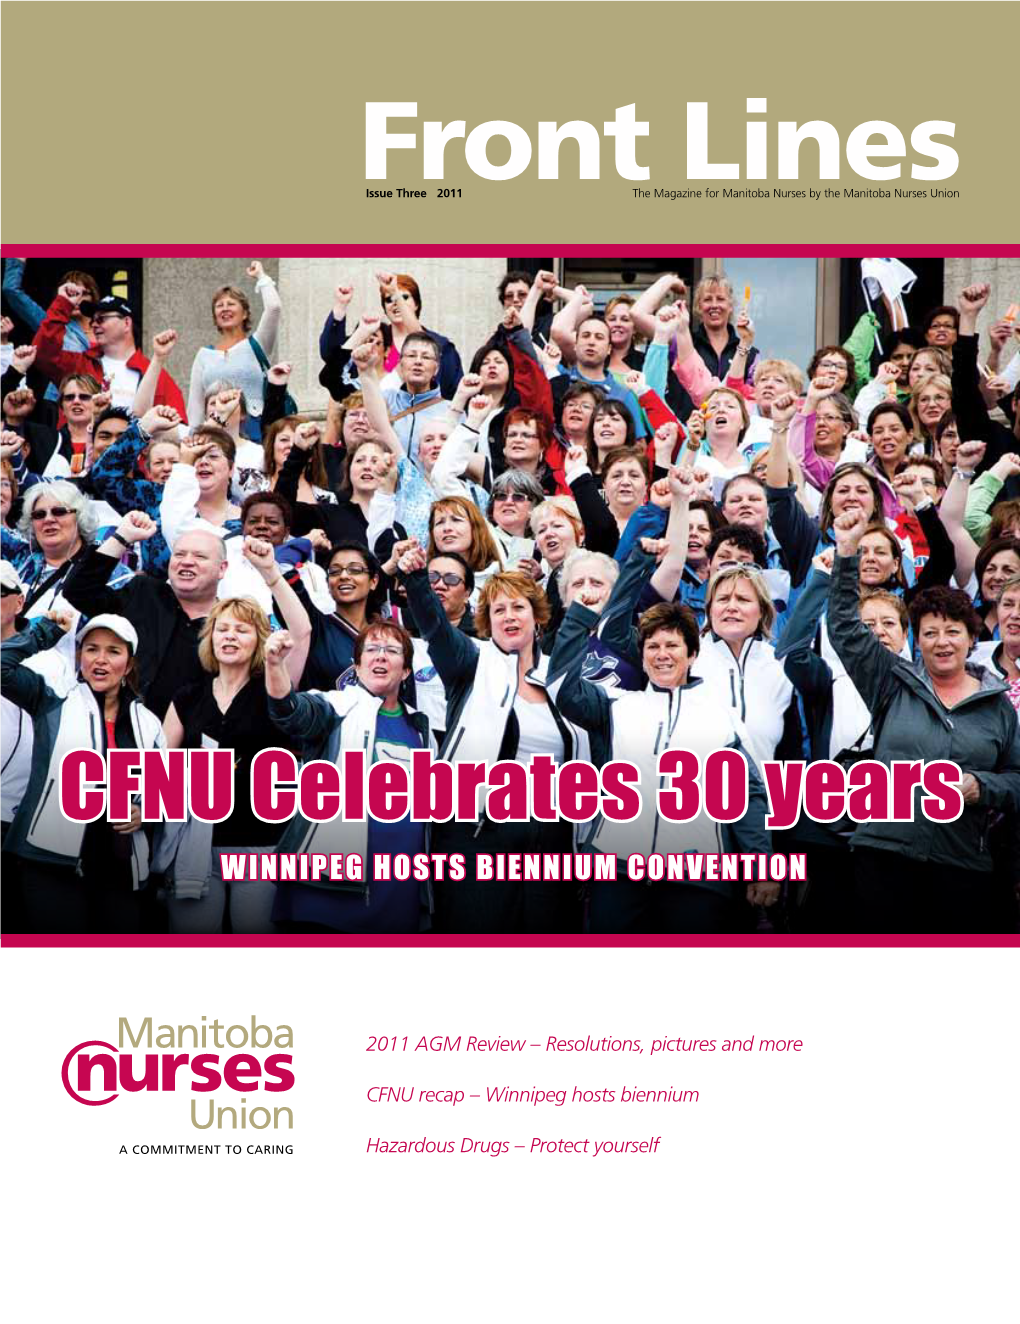 Front Lines Is Published by the Manitoba Nurses Union (MNU)